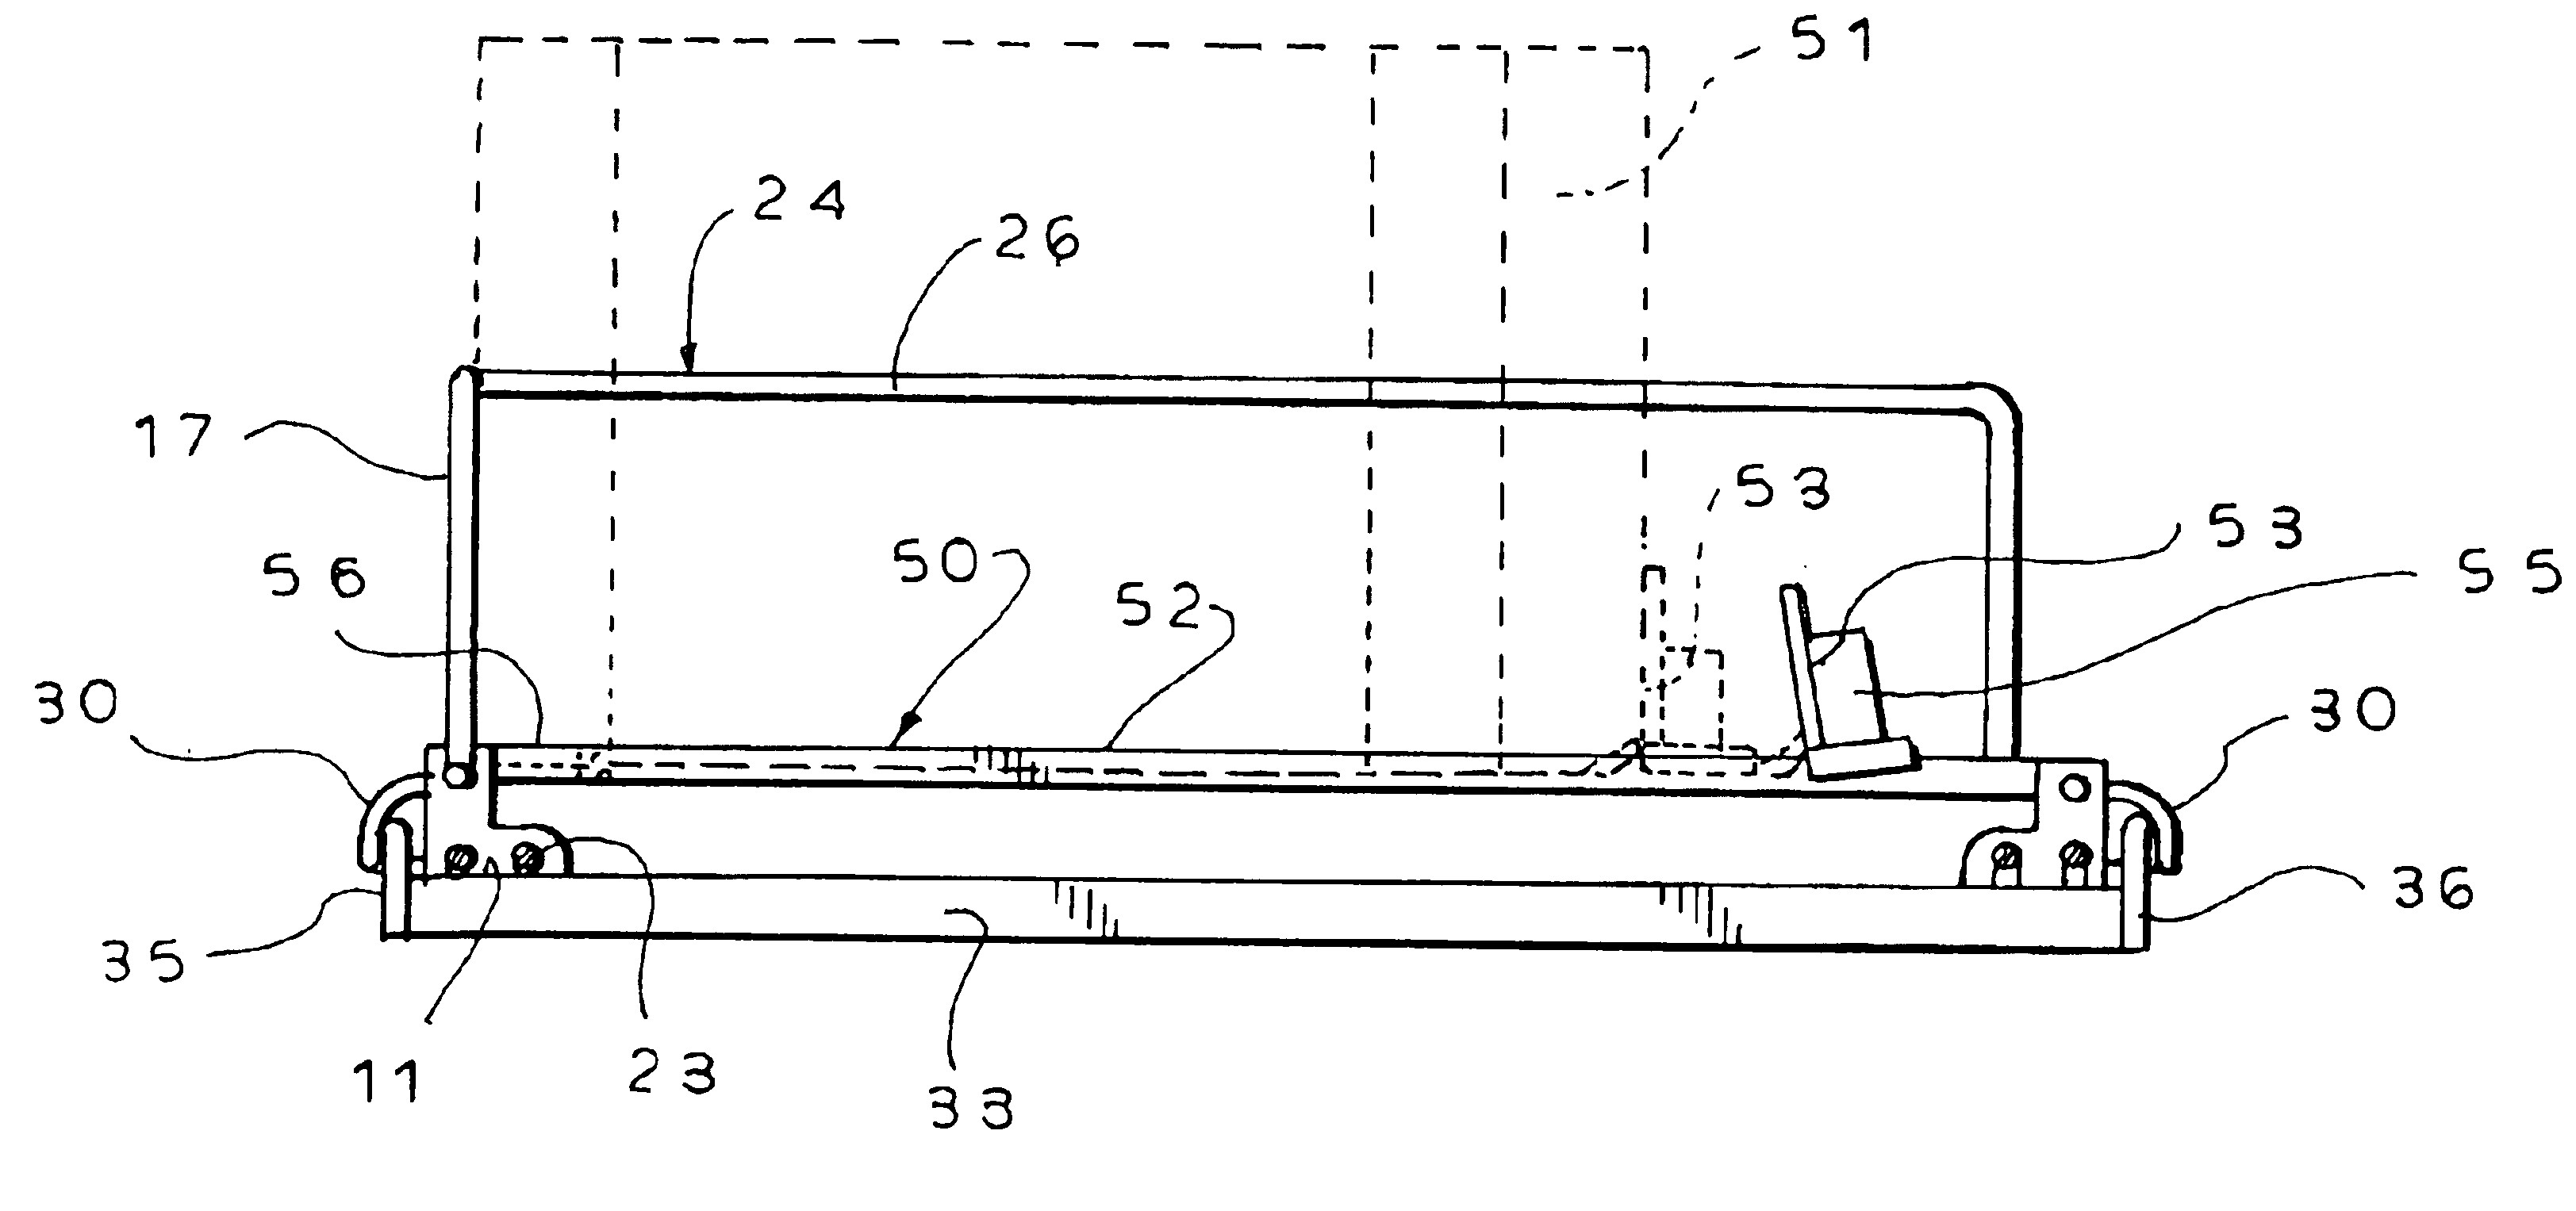 Adjustable width product display system